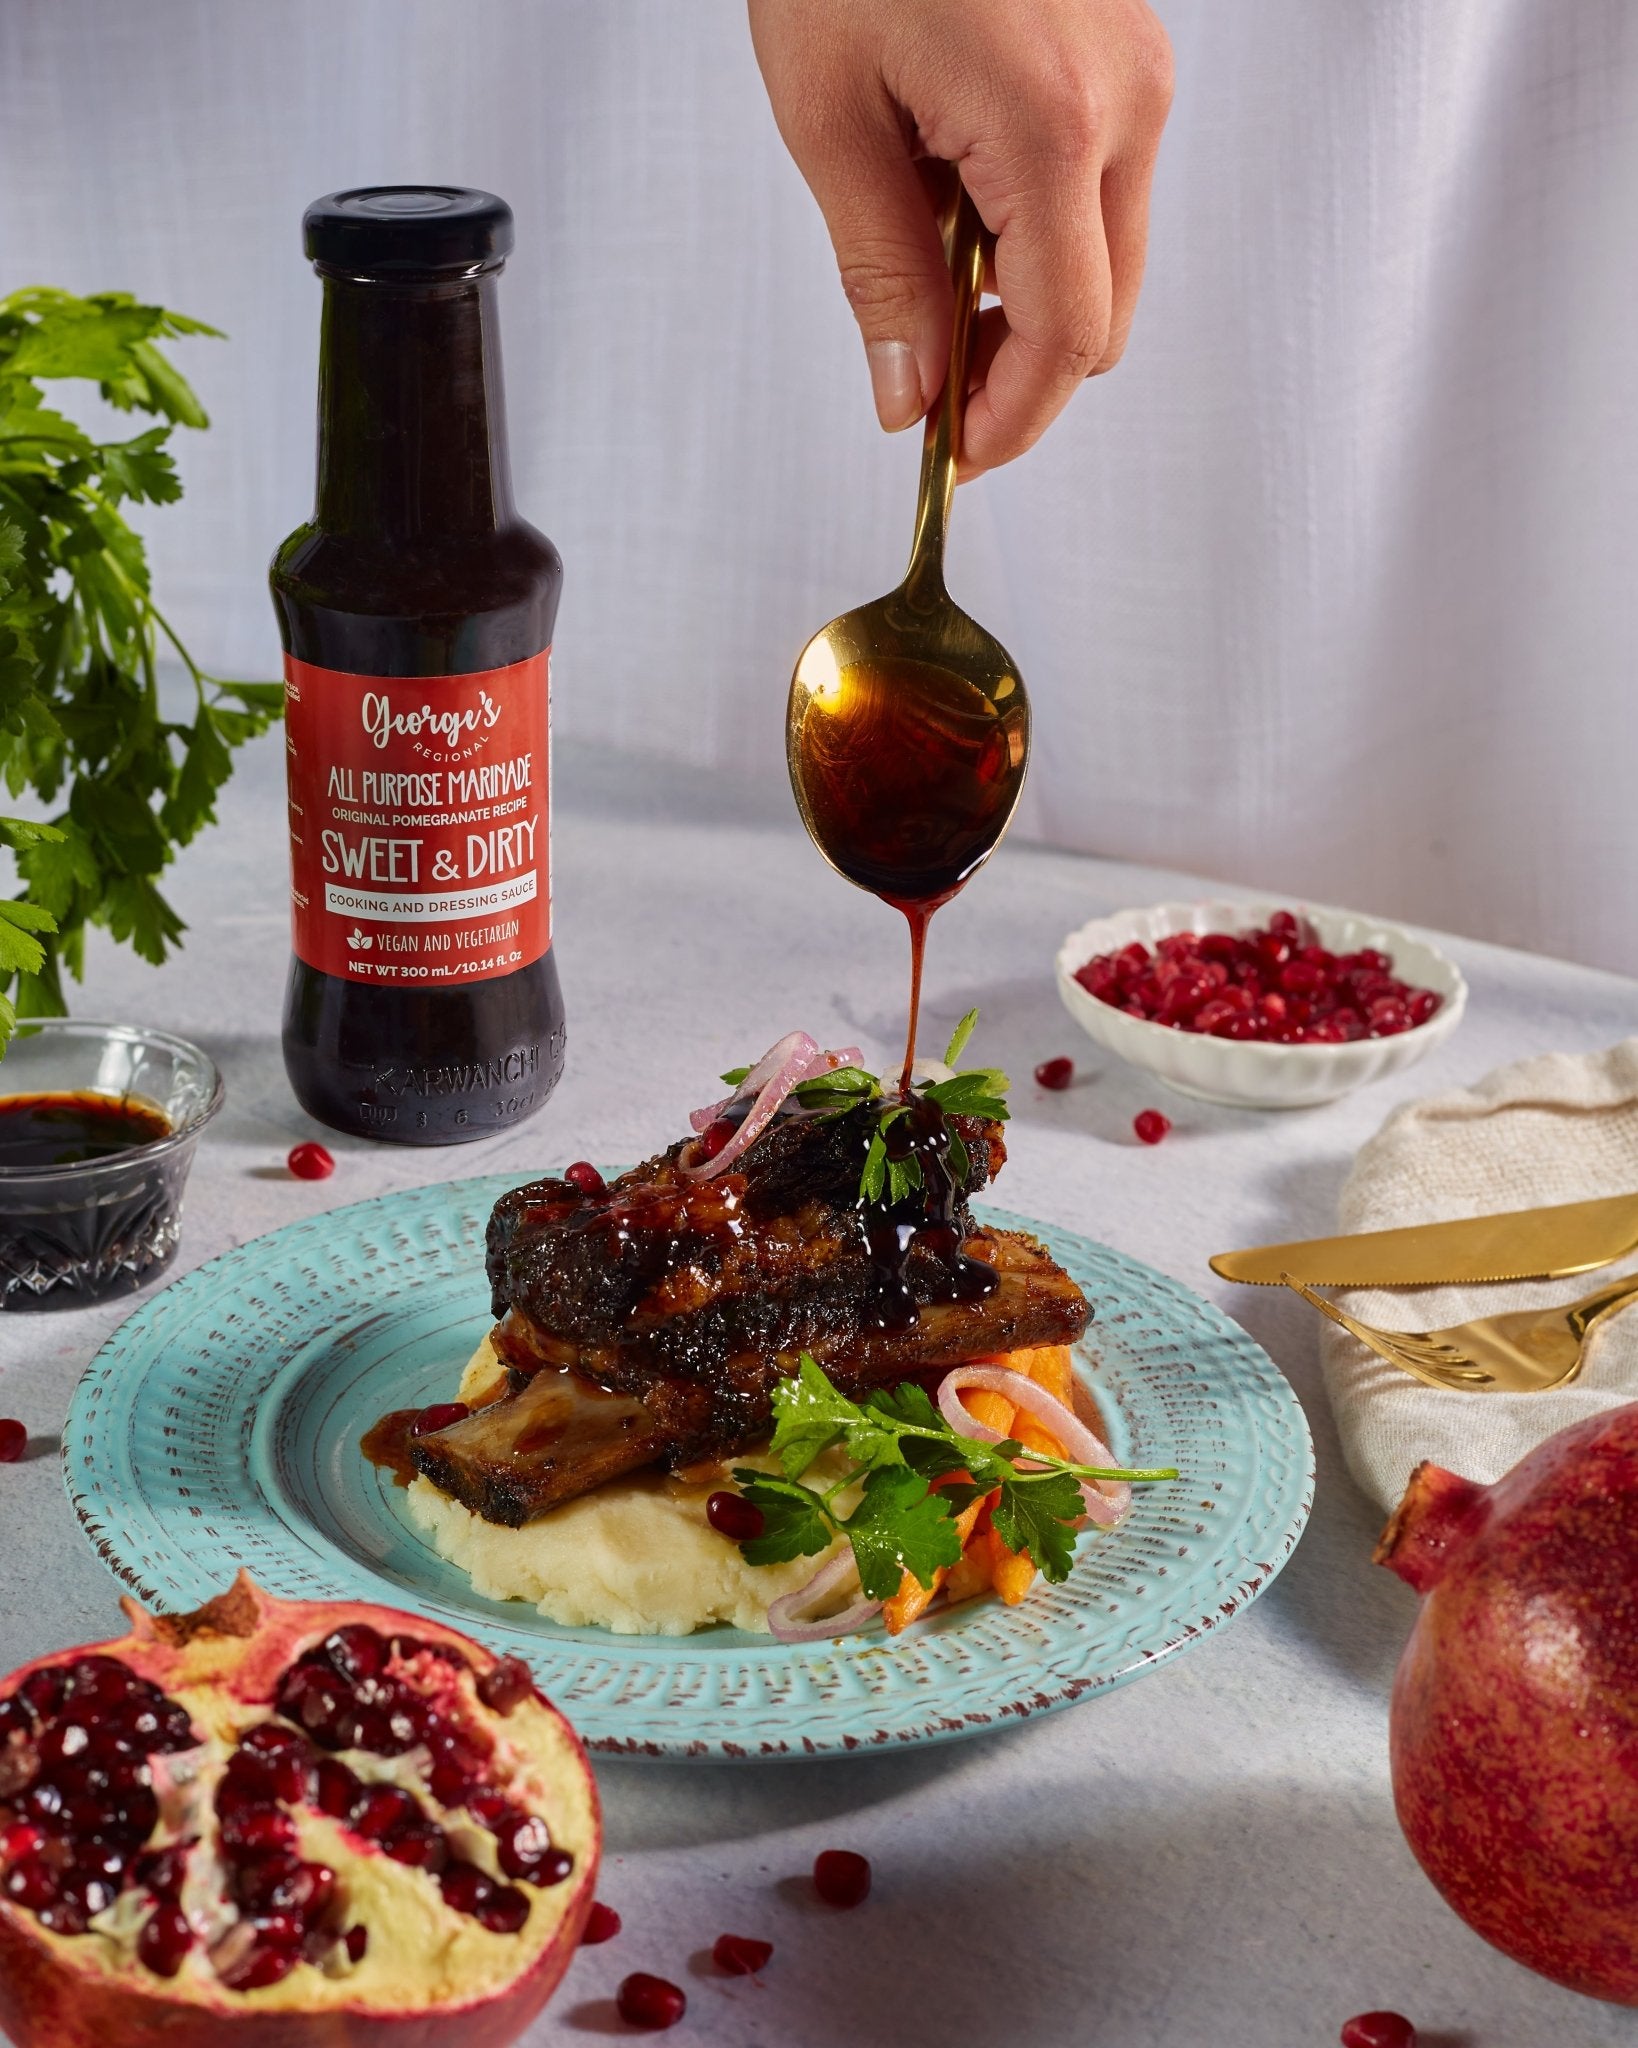 George's Regional Pomegranate Molasses All Purpose Marinade and Dressing Sauce (Sweet & Dirty Flavor 300 mL/10.14 fl.Oz) - Mideast Grocers